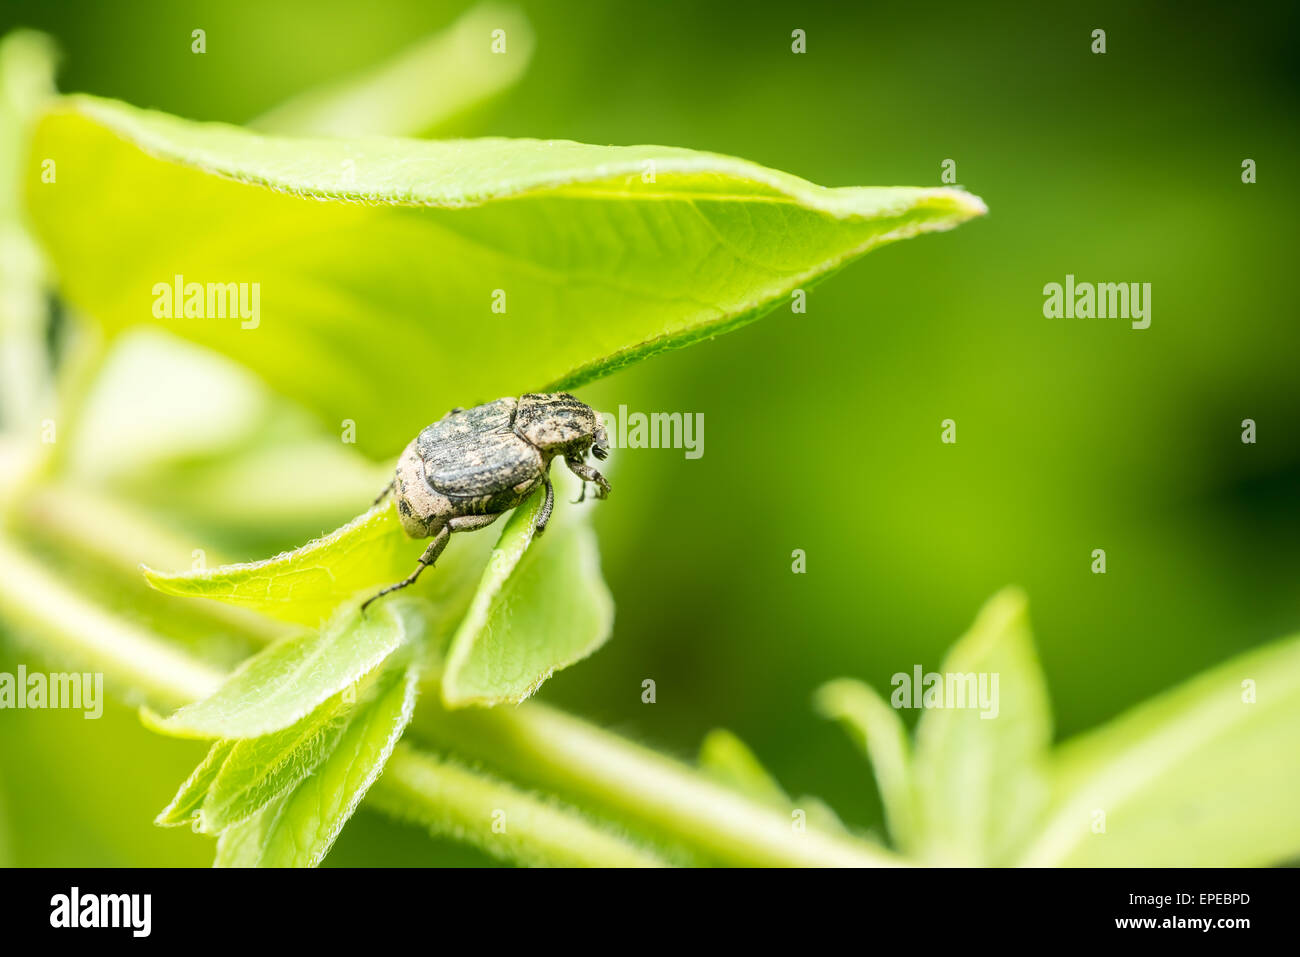 Beetle Insect Macro On Green Background Stock Photo